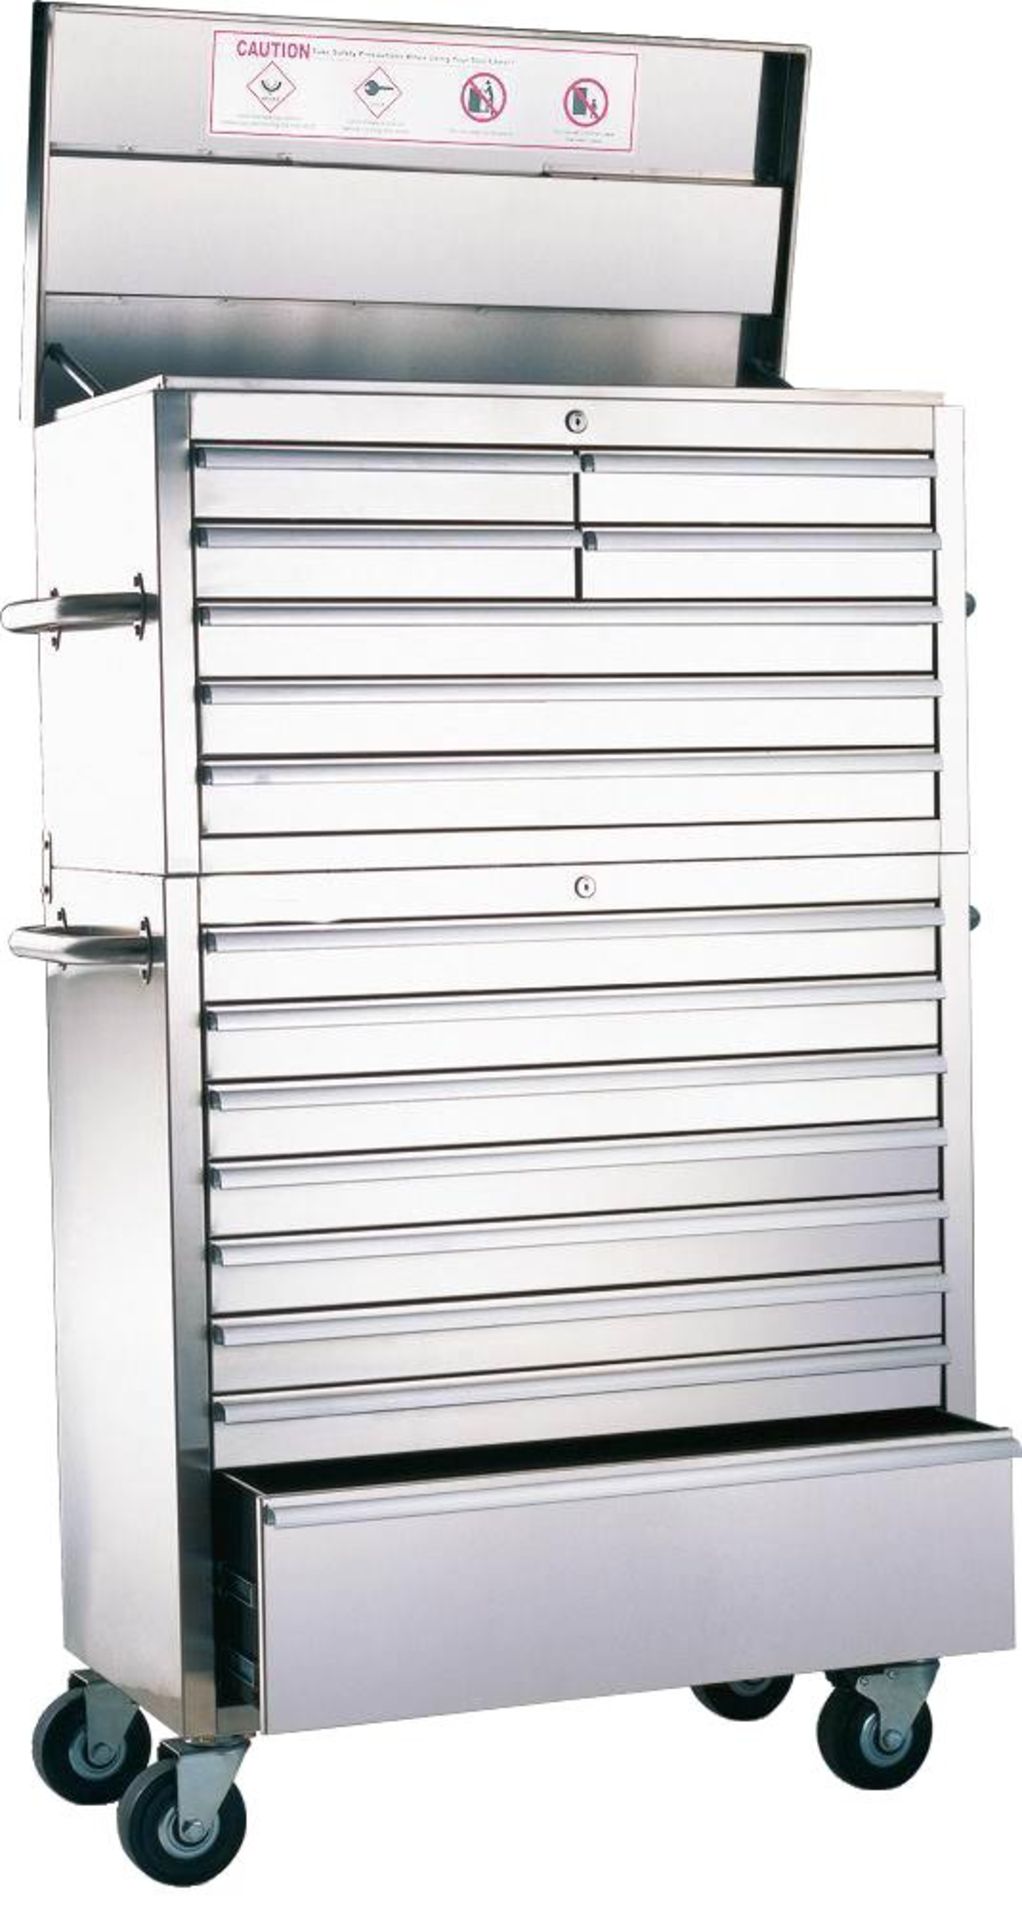 36 inch 15 draw stainless steel storage unit 915mm W x 1550mm H 460mm D NEW and BOXED Includes: